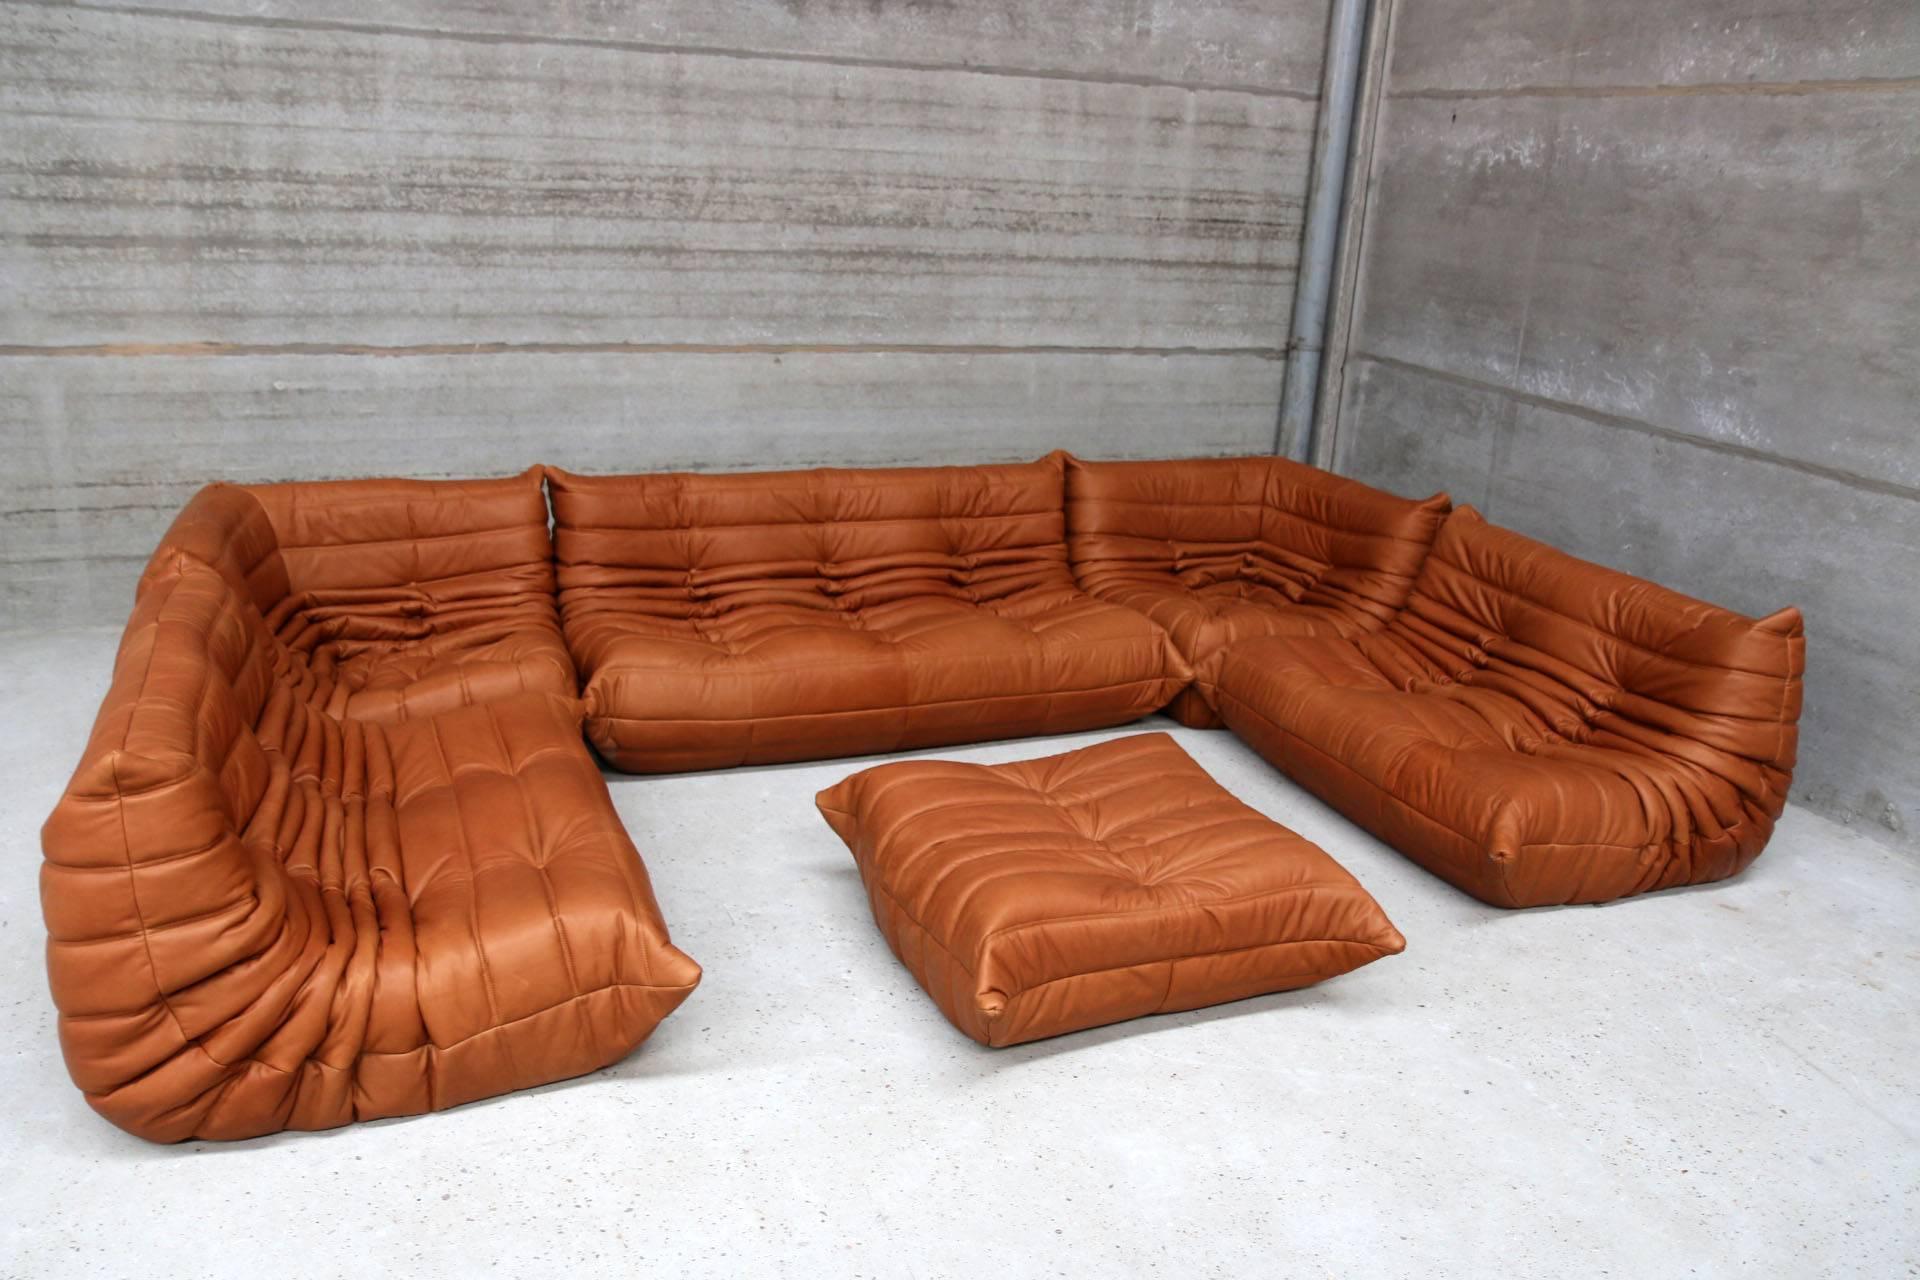 This set was designed by Michel Ducaroy in 1974 and was manufactured by Ligne Roset. Reupholstered in Belgium in our rich full grain cognac leather.
This set consists following pieces
1 x three-seat 174 x 102 x 70cm
2 x two-seat 131 x 102 x 70cm
Two